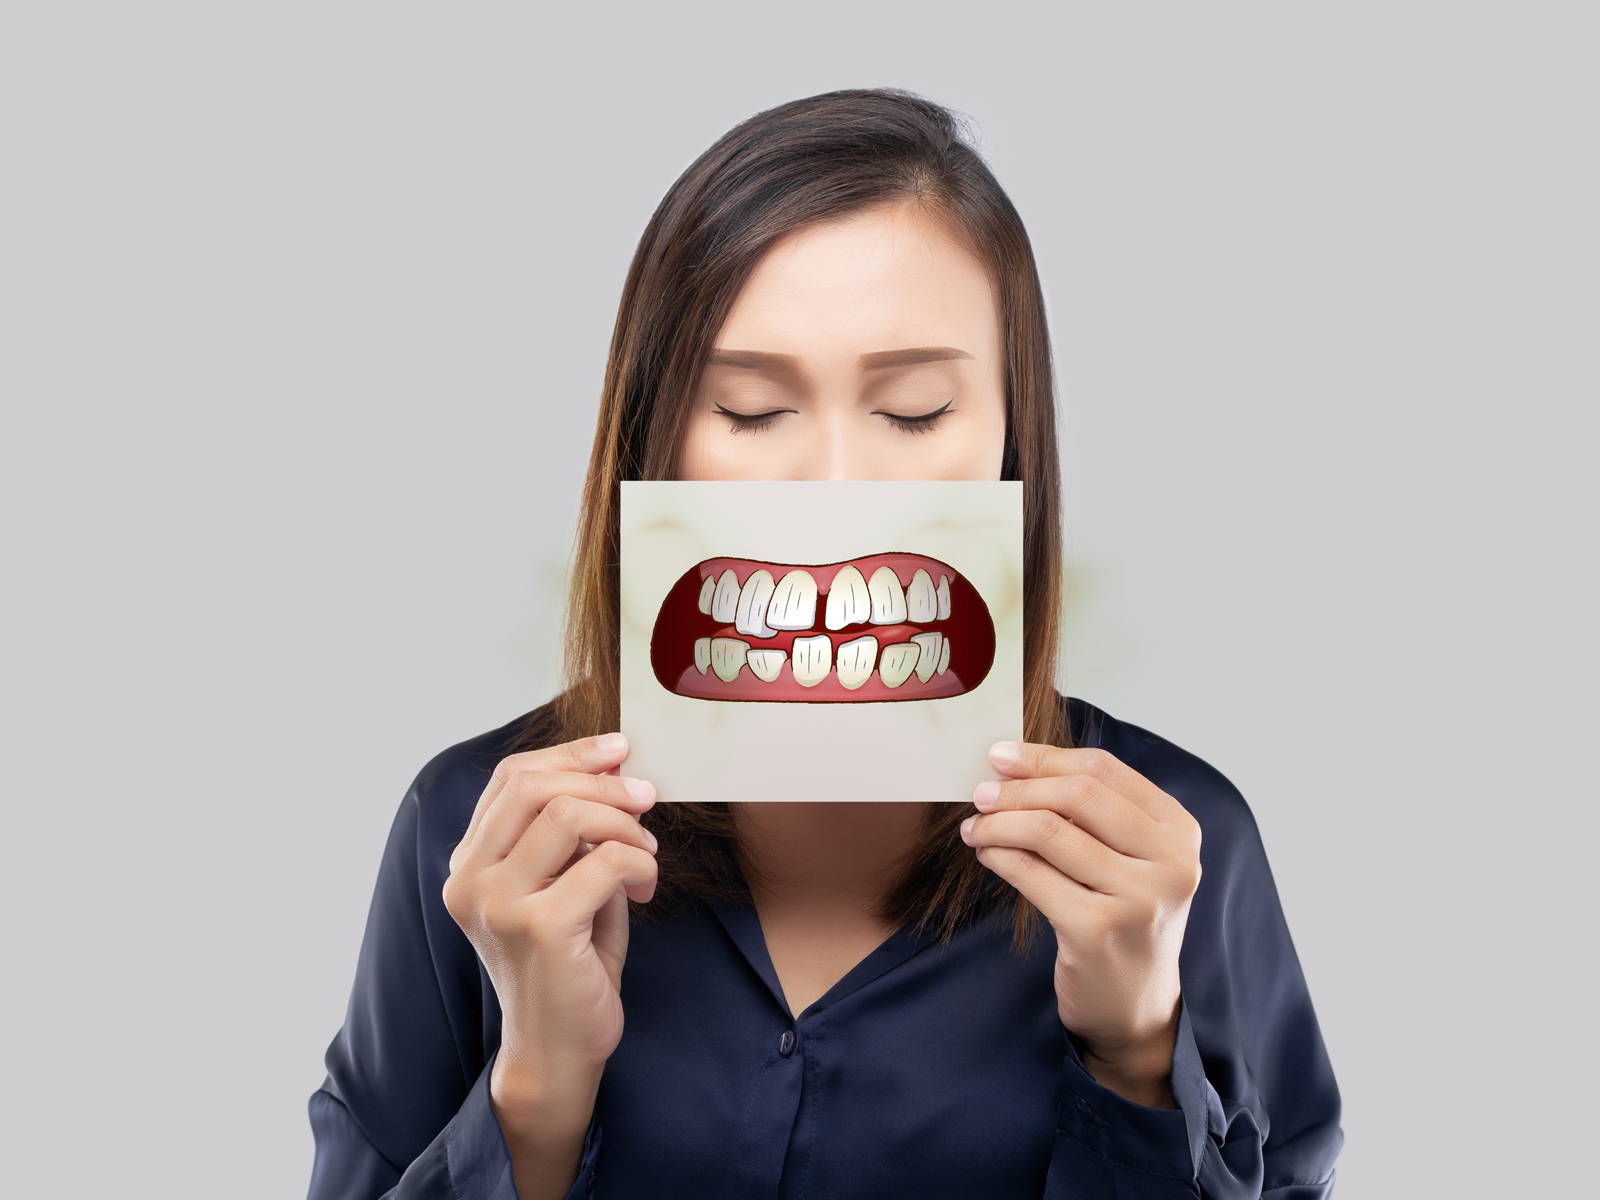 What diseases can be caused by having poor oral health?